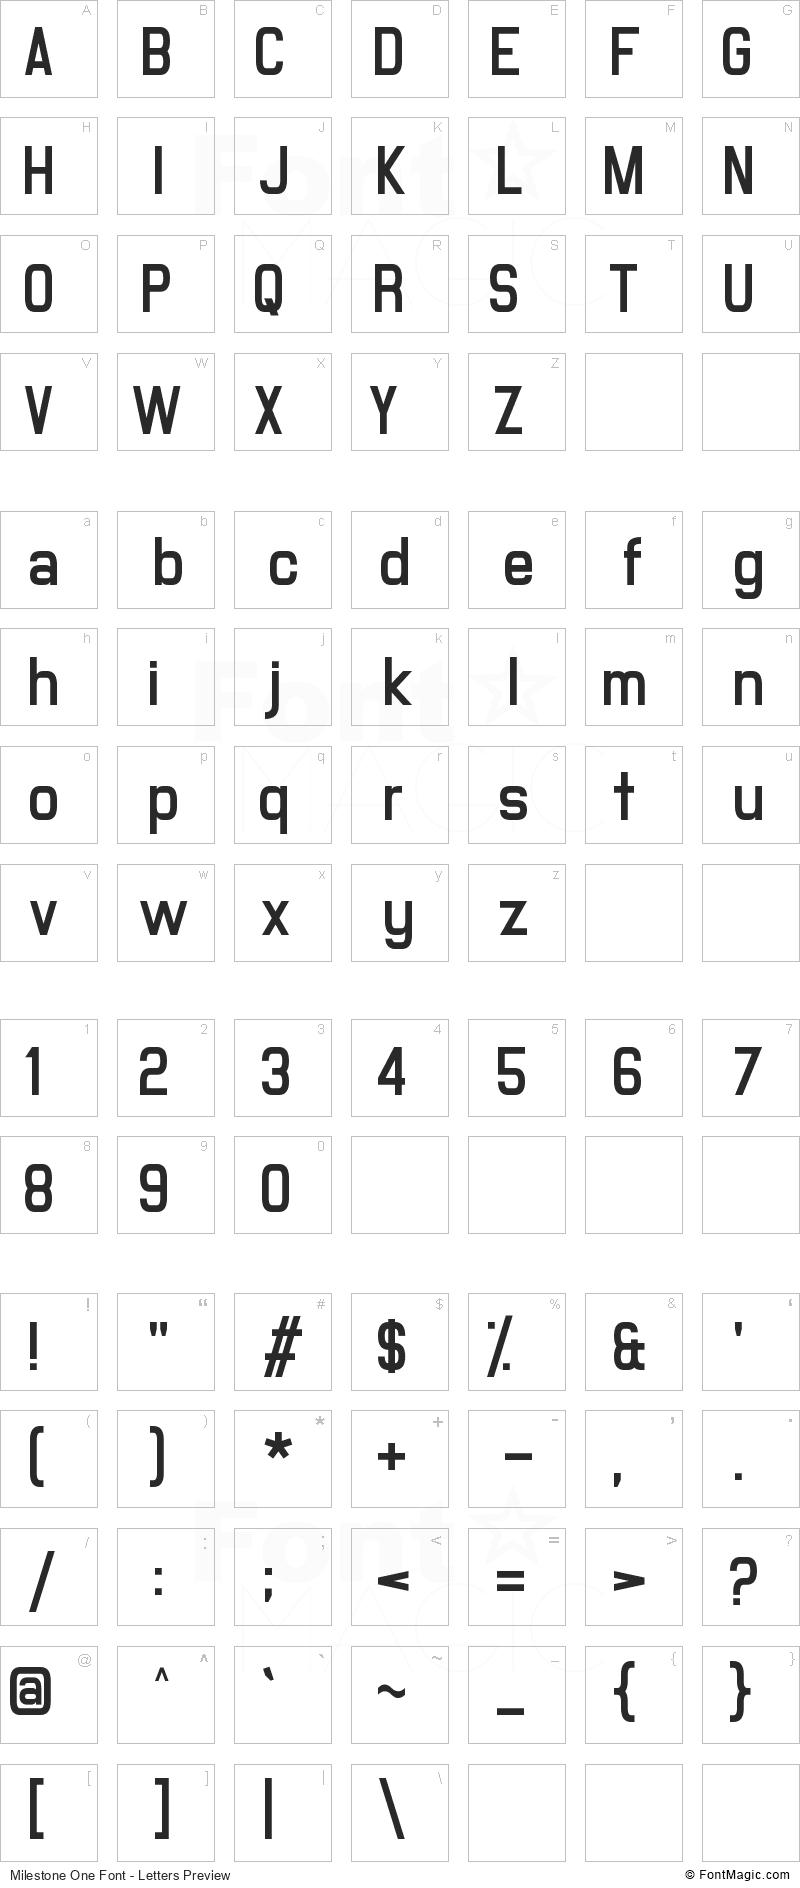 Milestone One Font - All Latters Preview Chart